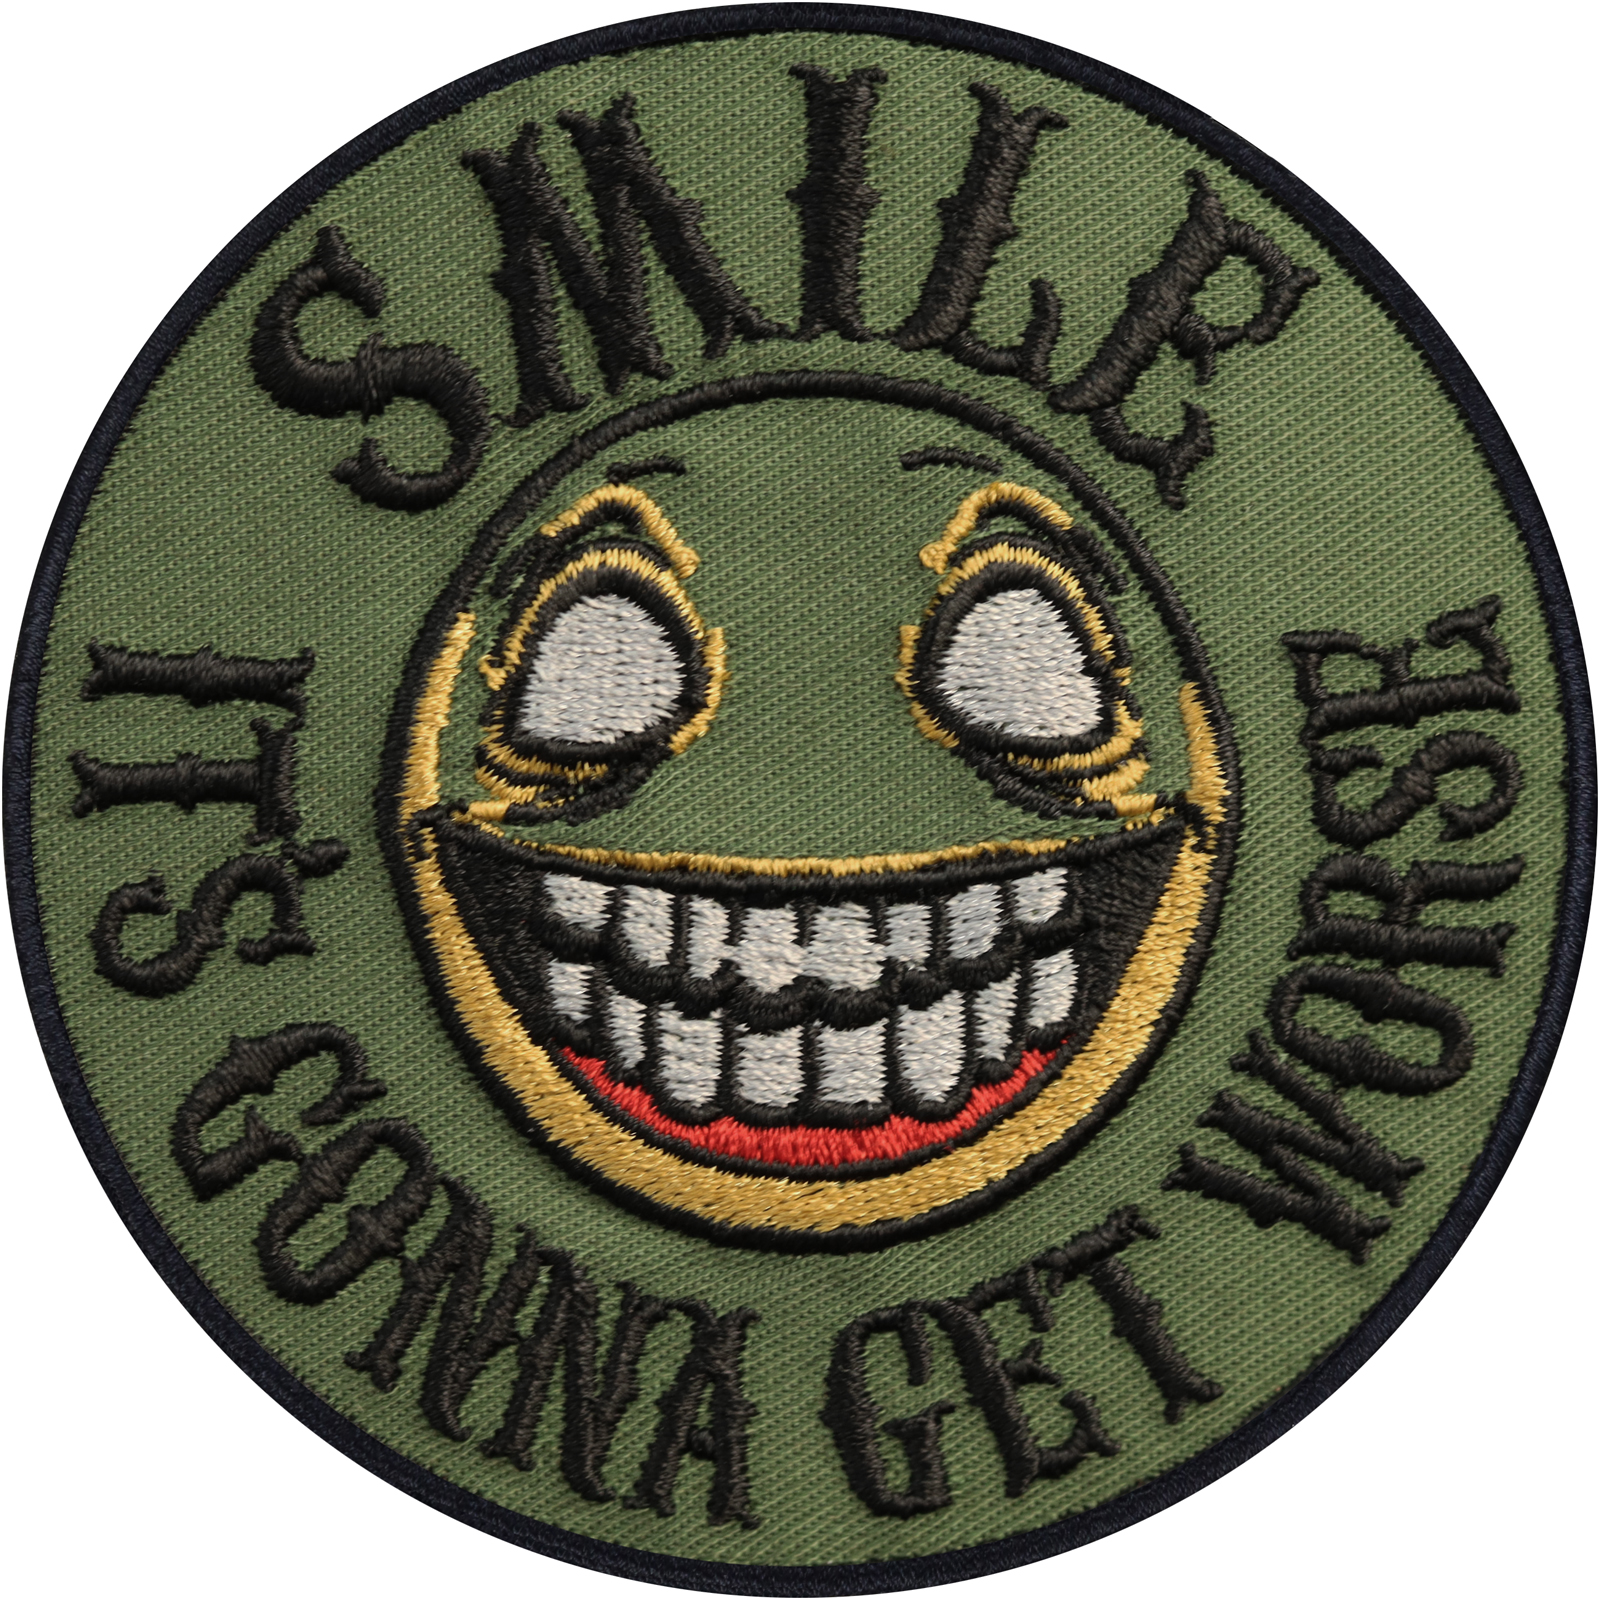 Smile, it's gonna get worse - Patch